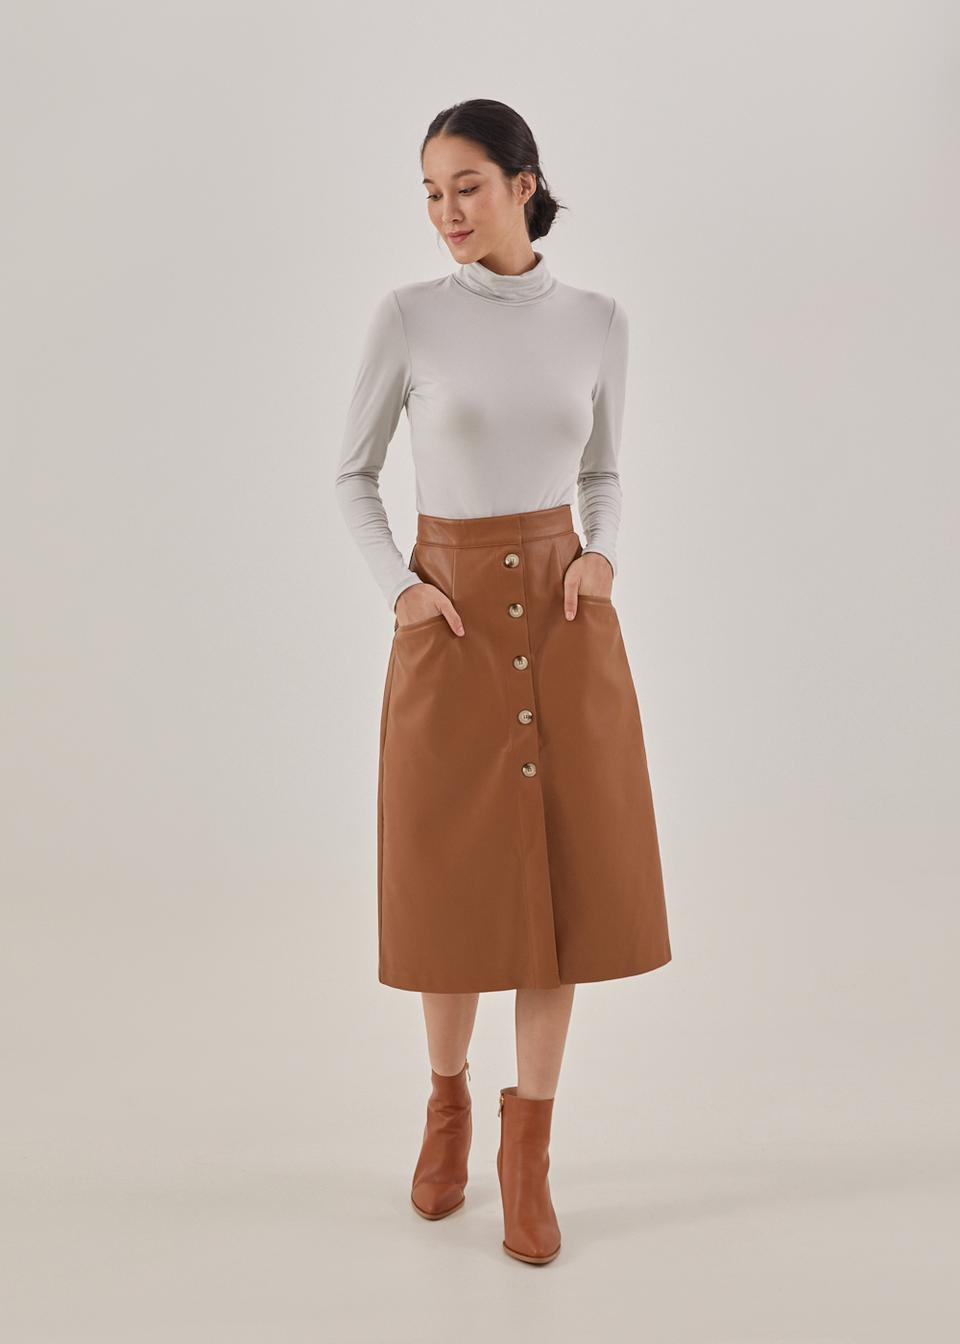 Dianne Pleather A-line Skirt